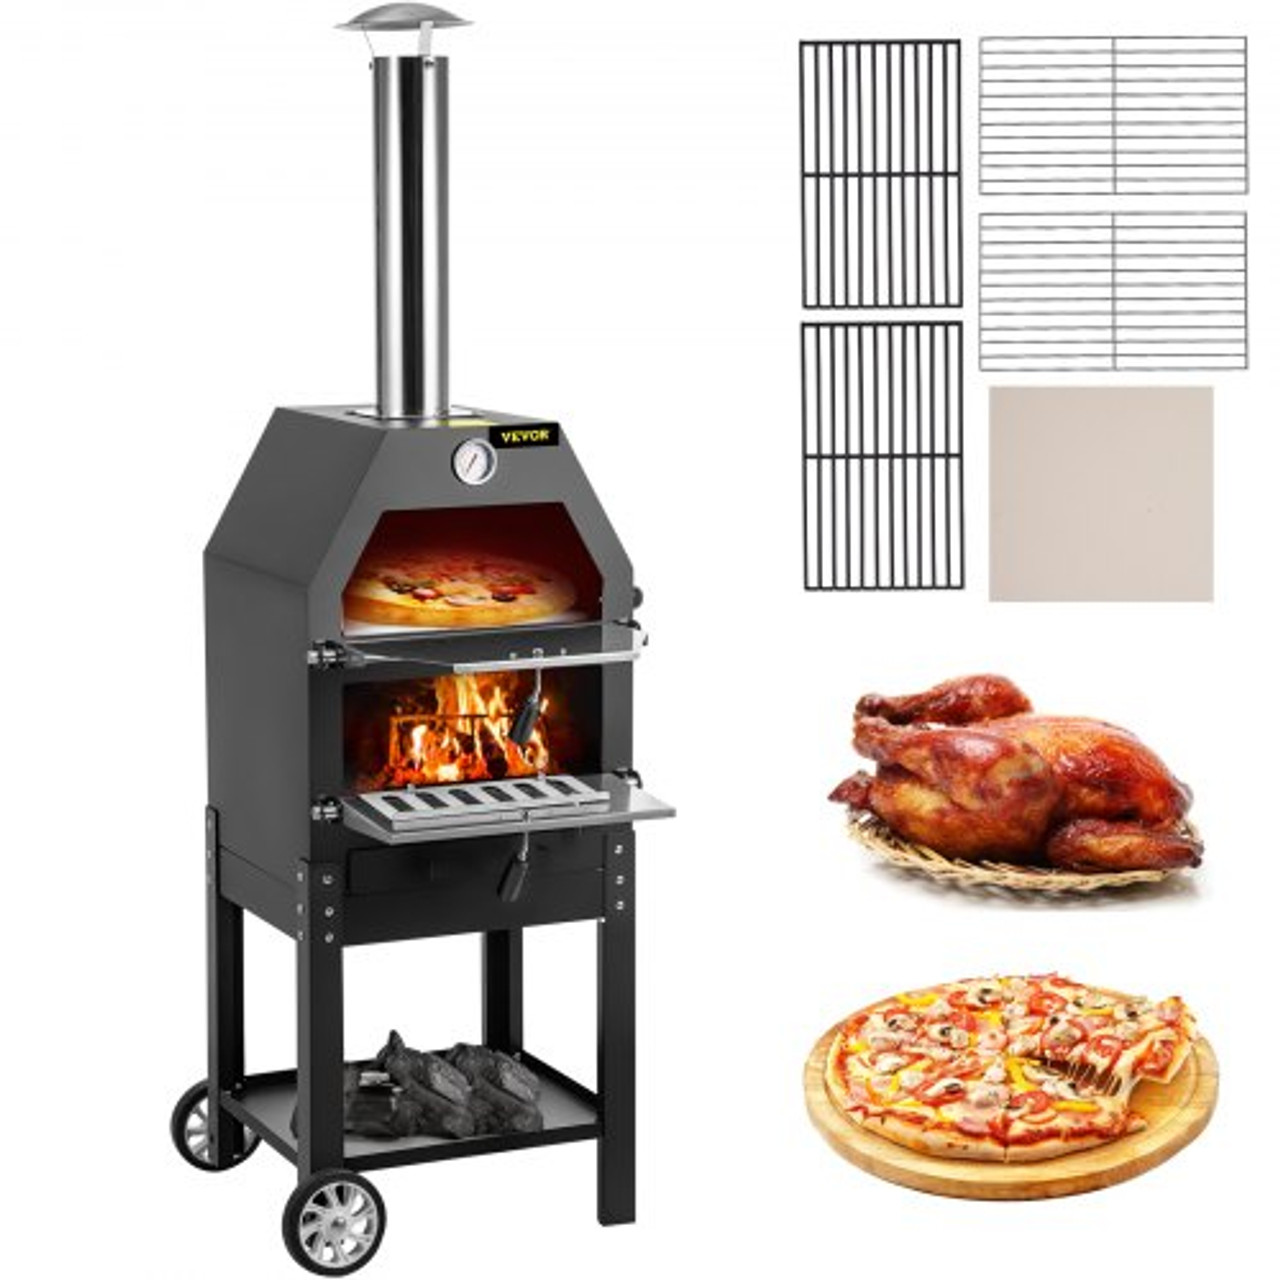 Outdoor Pizza Oven, 12" Wood Fire Oven, 2-Layer Pizza Oven Wood Fired, Wood Burning Outdoor Pizza Oven w/ 2 Removable Wheels, Wood Fired Pizza Maker Ovens w/ 900? Max Temperature for Barbecue